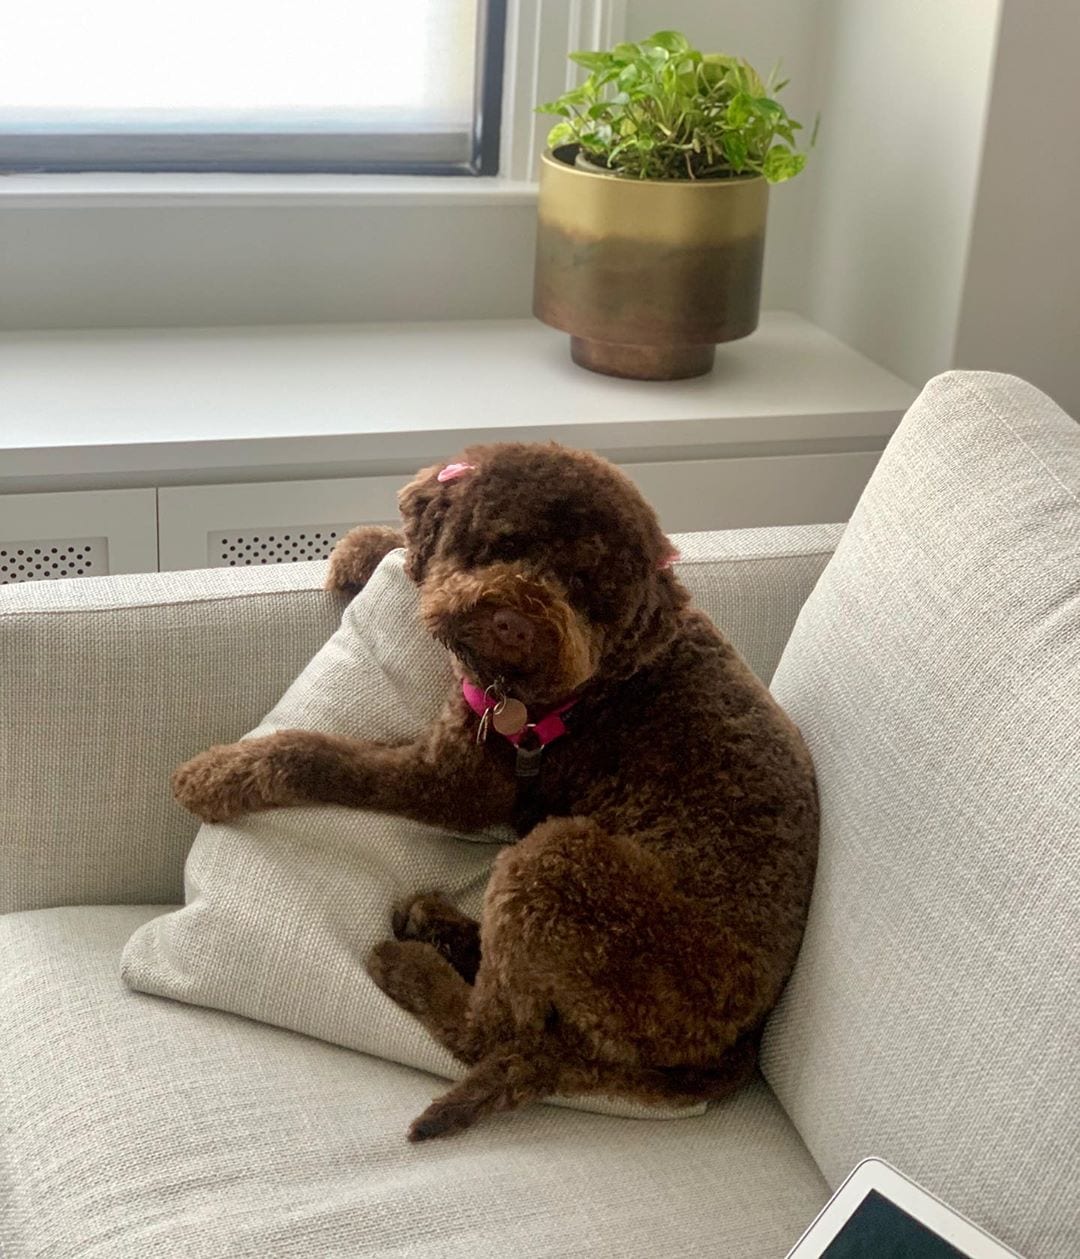 A Lagotto Romagnolo puppy sitting on the couch